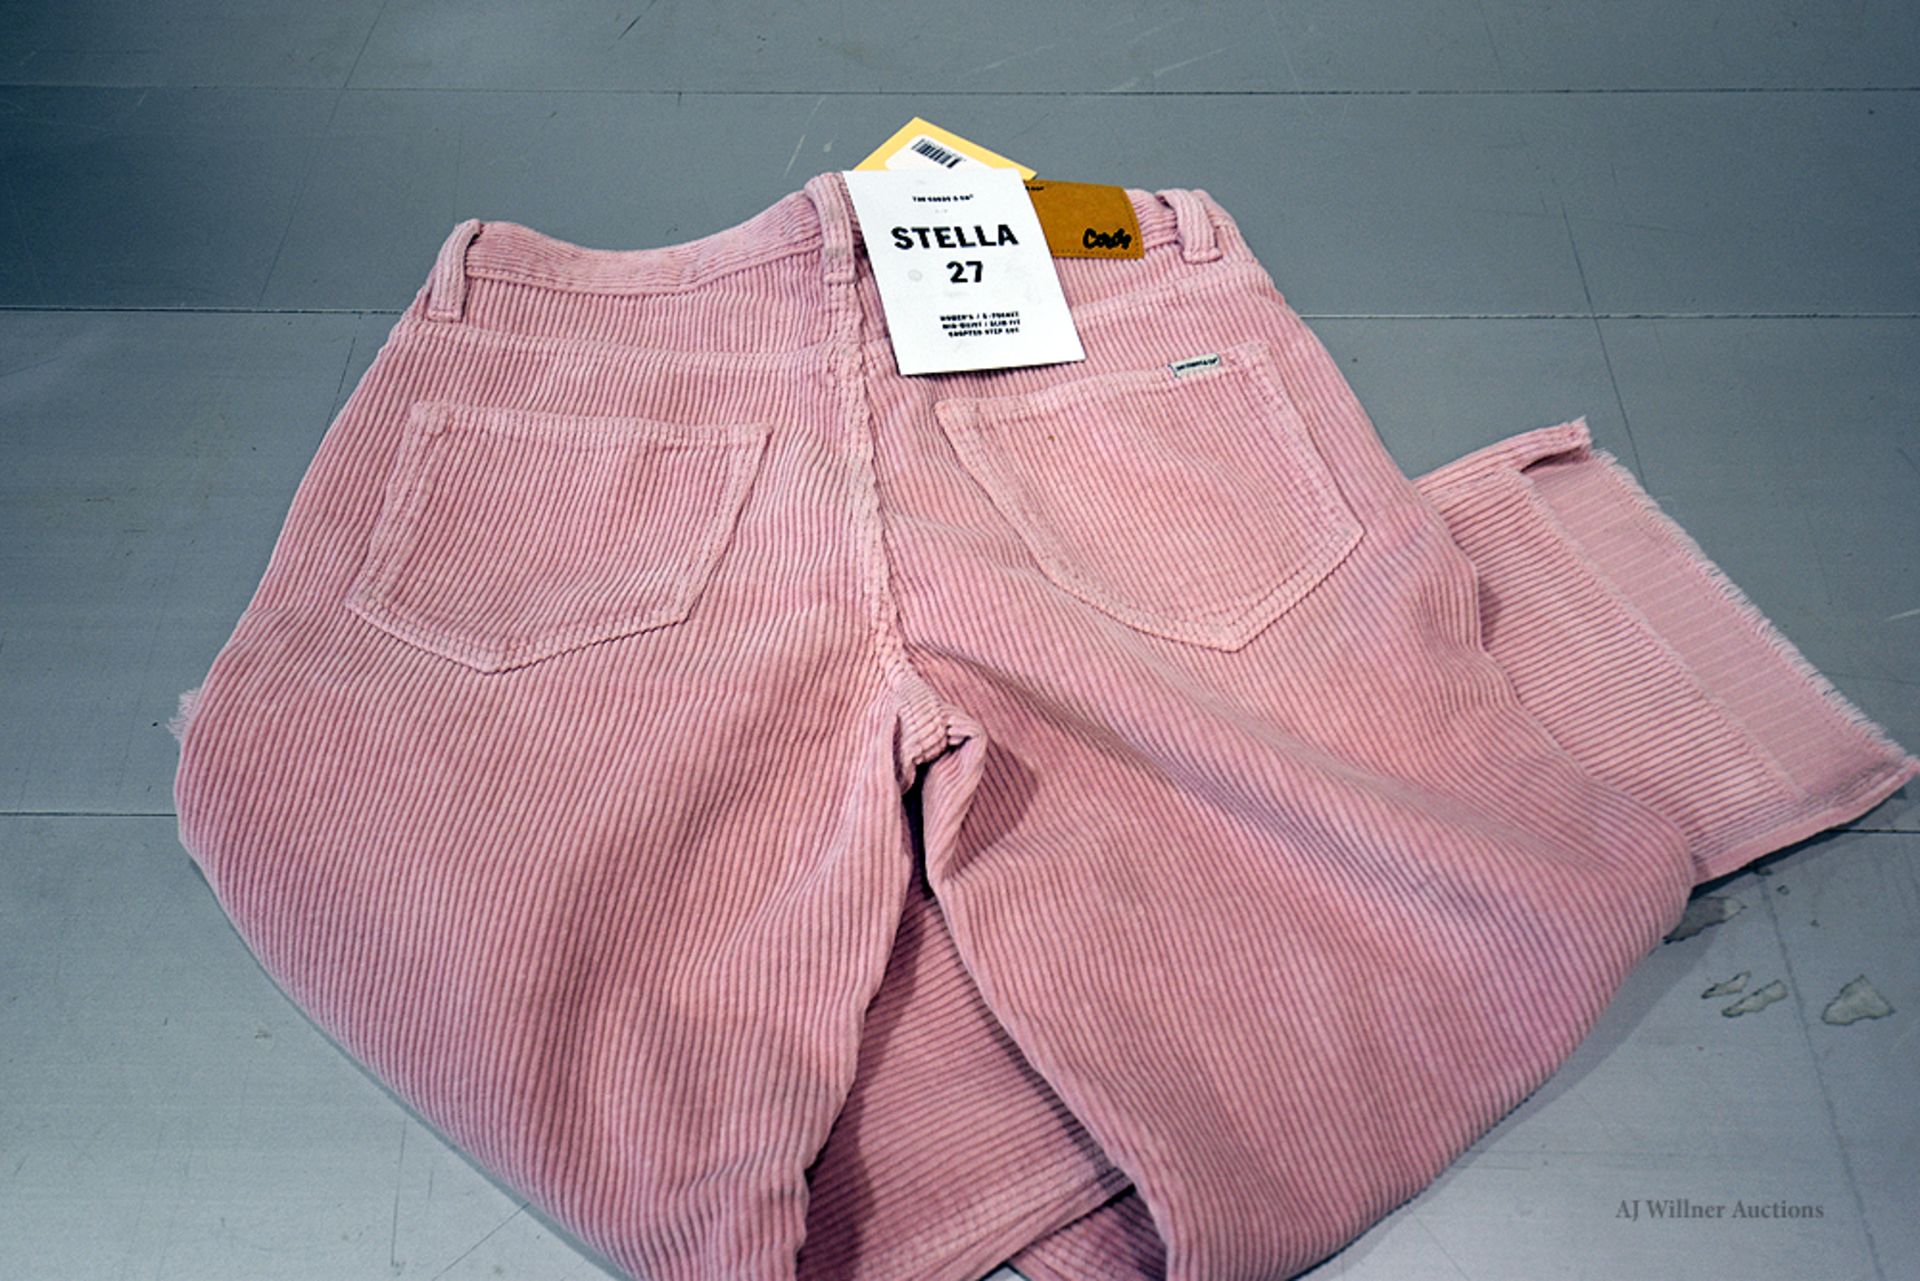 The Cords & Co. "Stella" Womens/ Mid Waist/ Slim Fit/ Cropped Pants MSRP $150 - Image 3 of 5